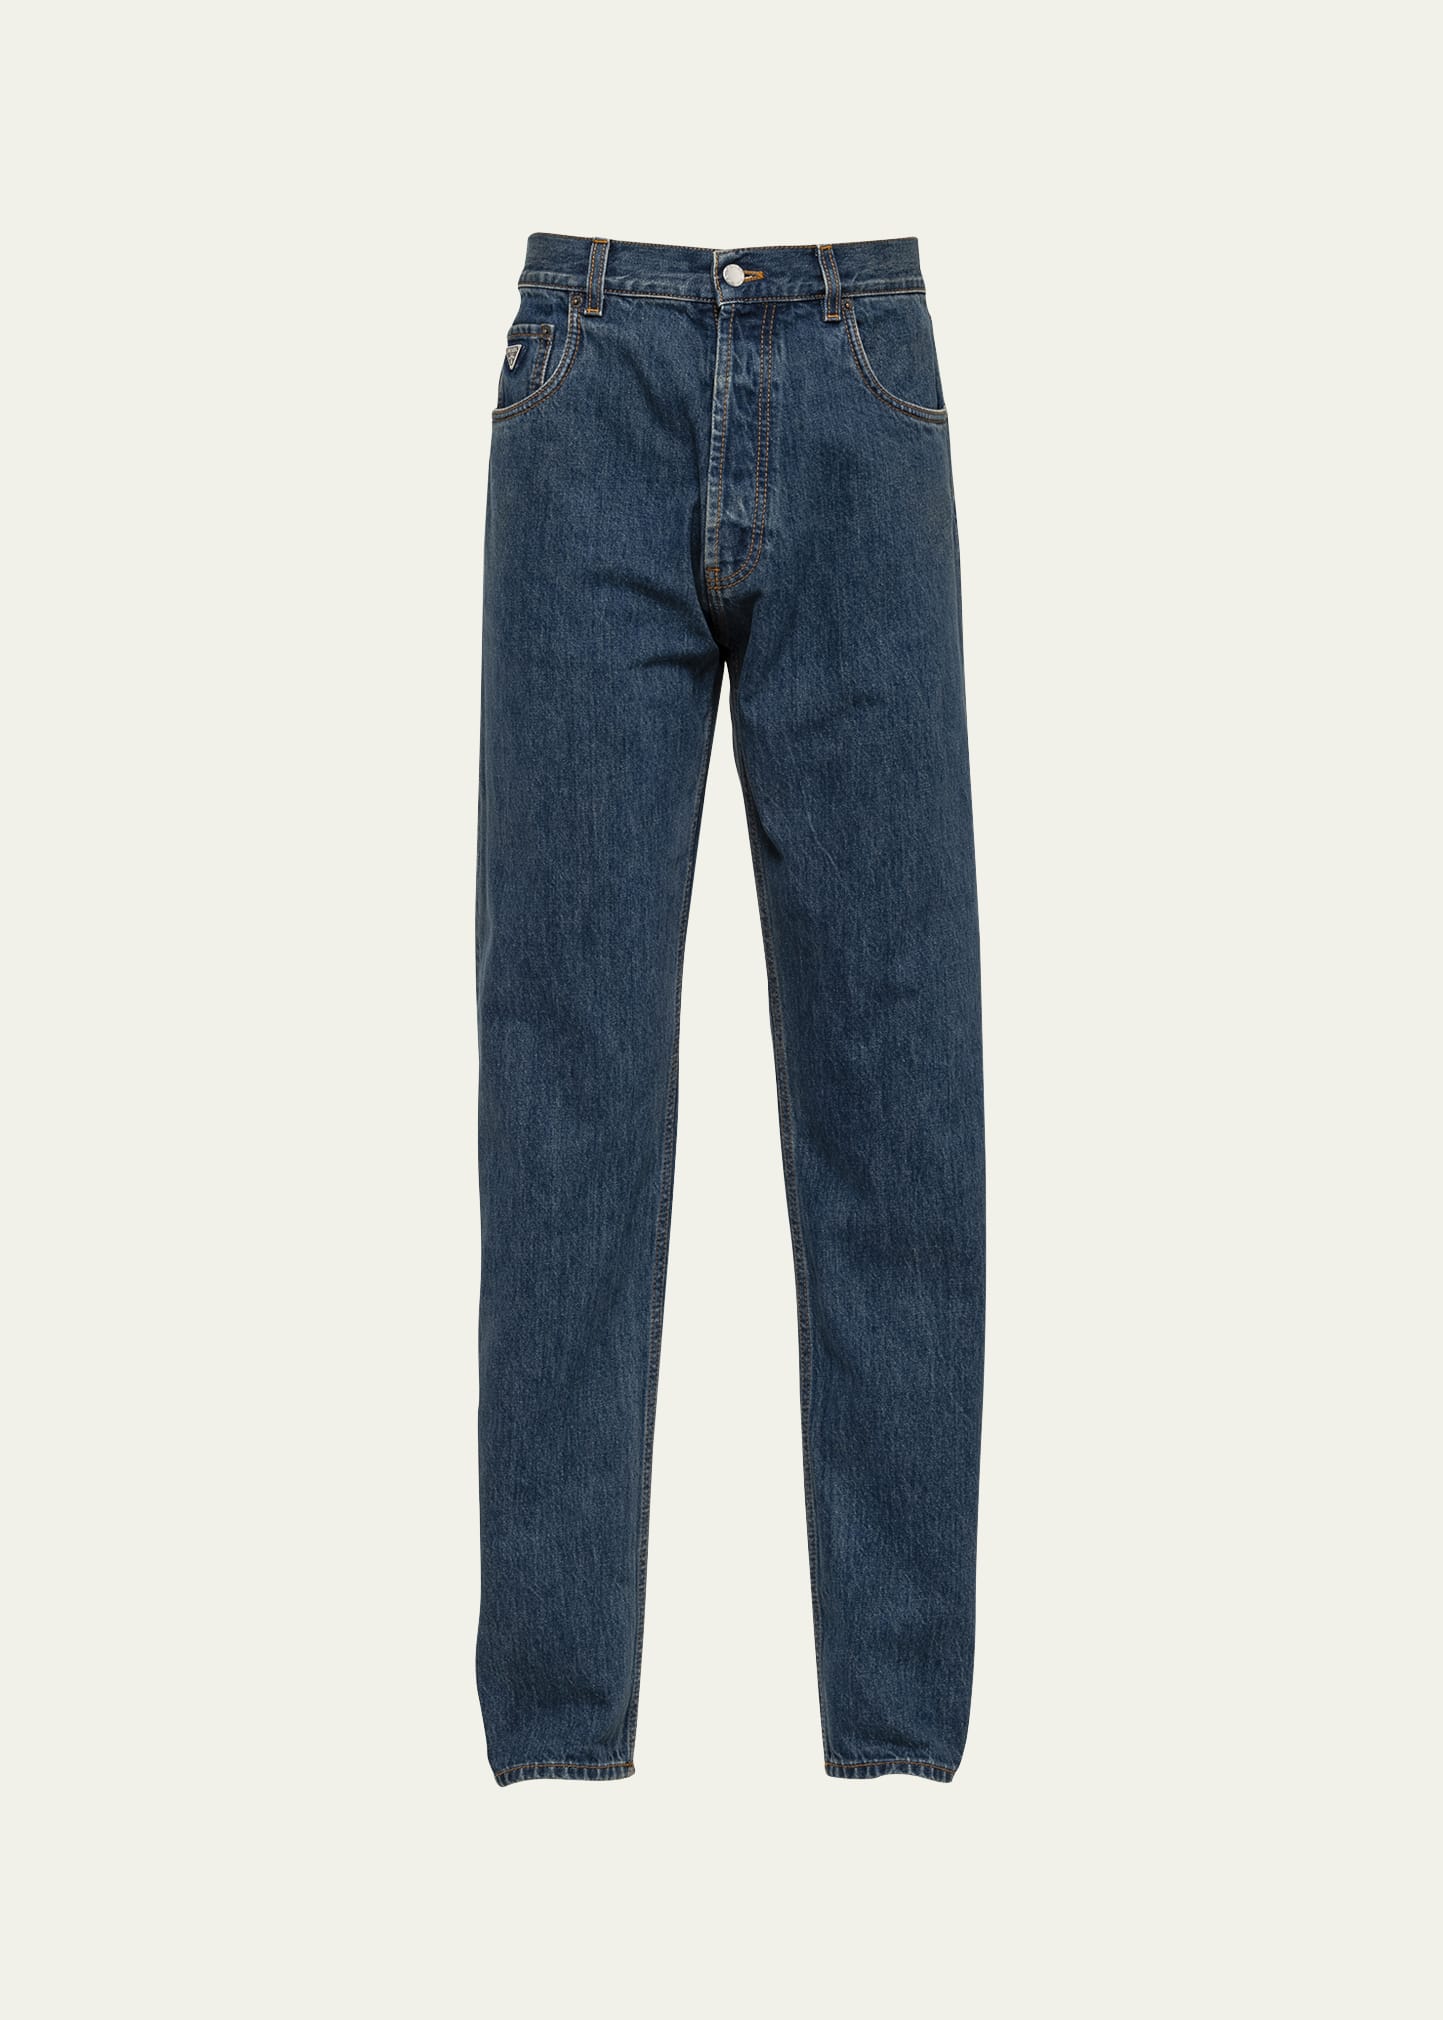 Men's Relaxed-Fit Washed Denim Jeans